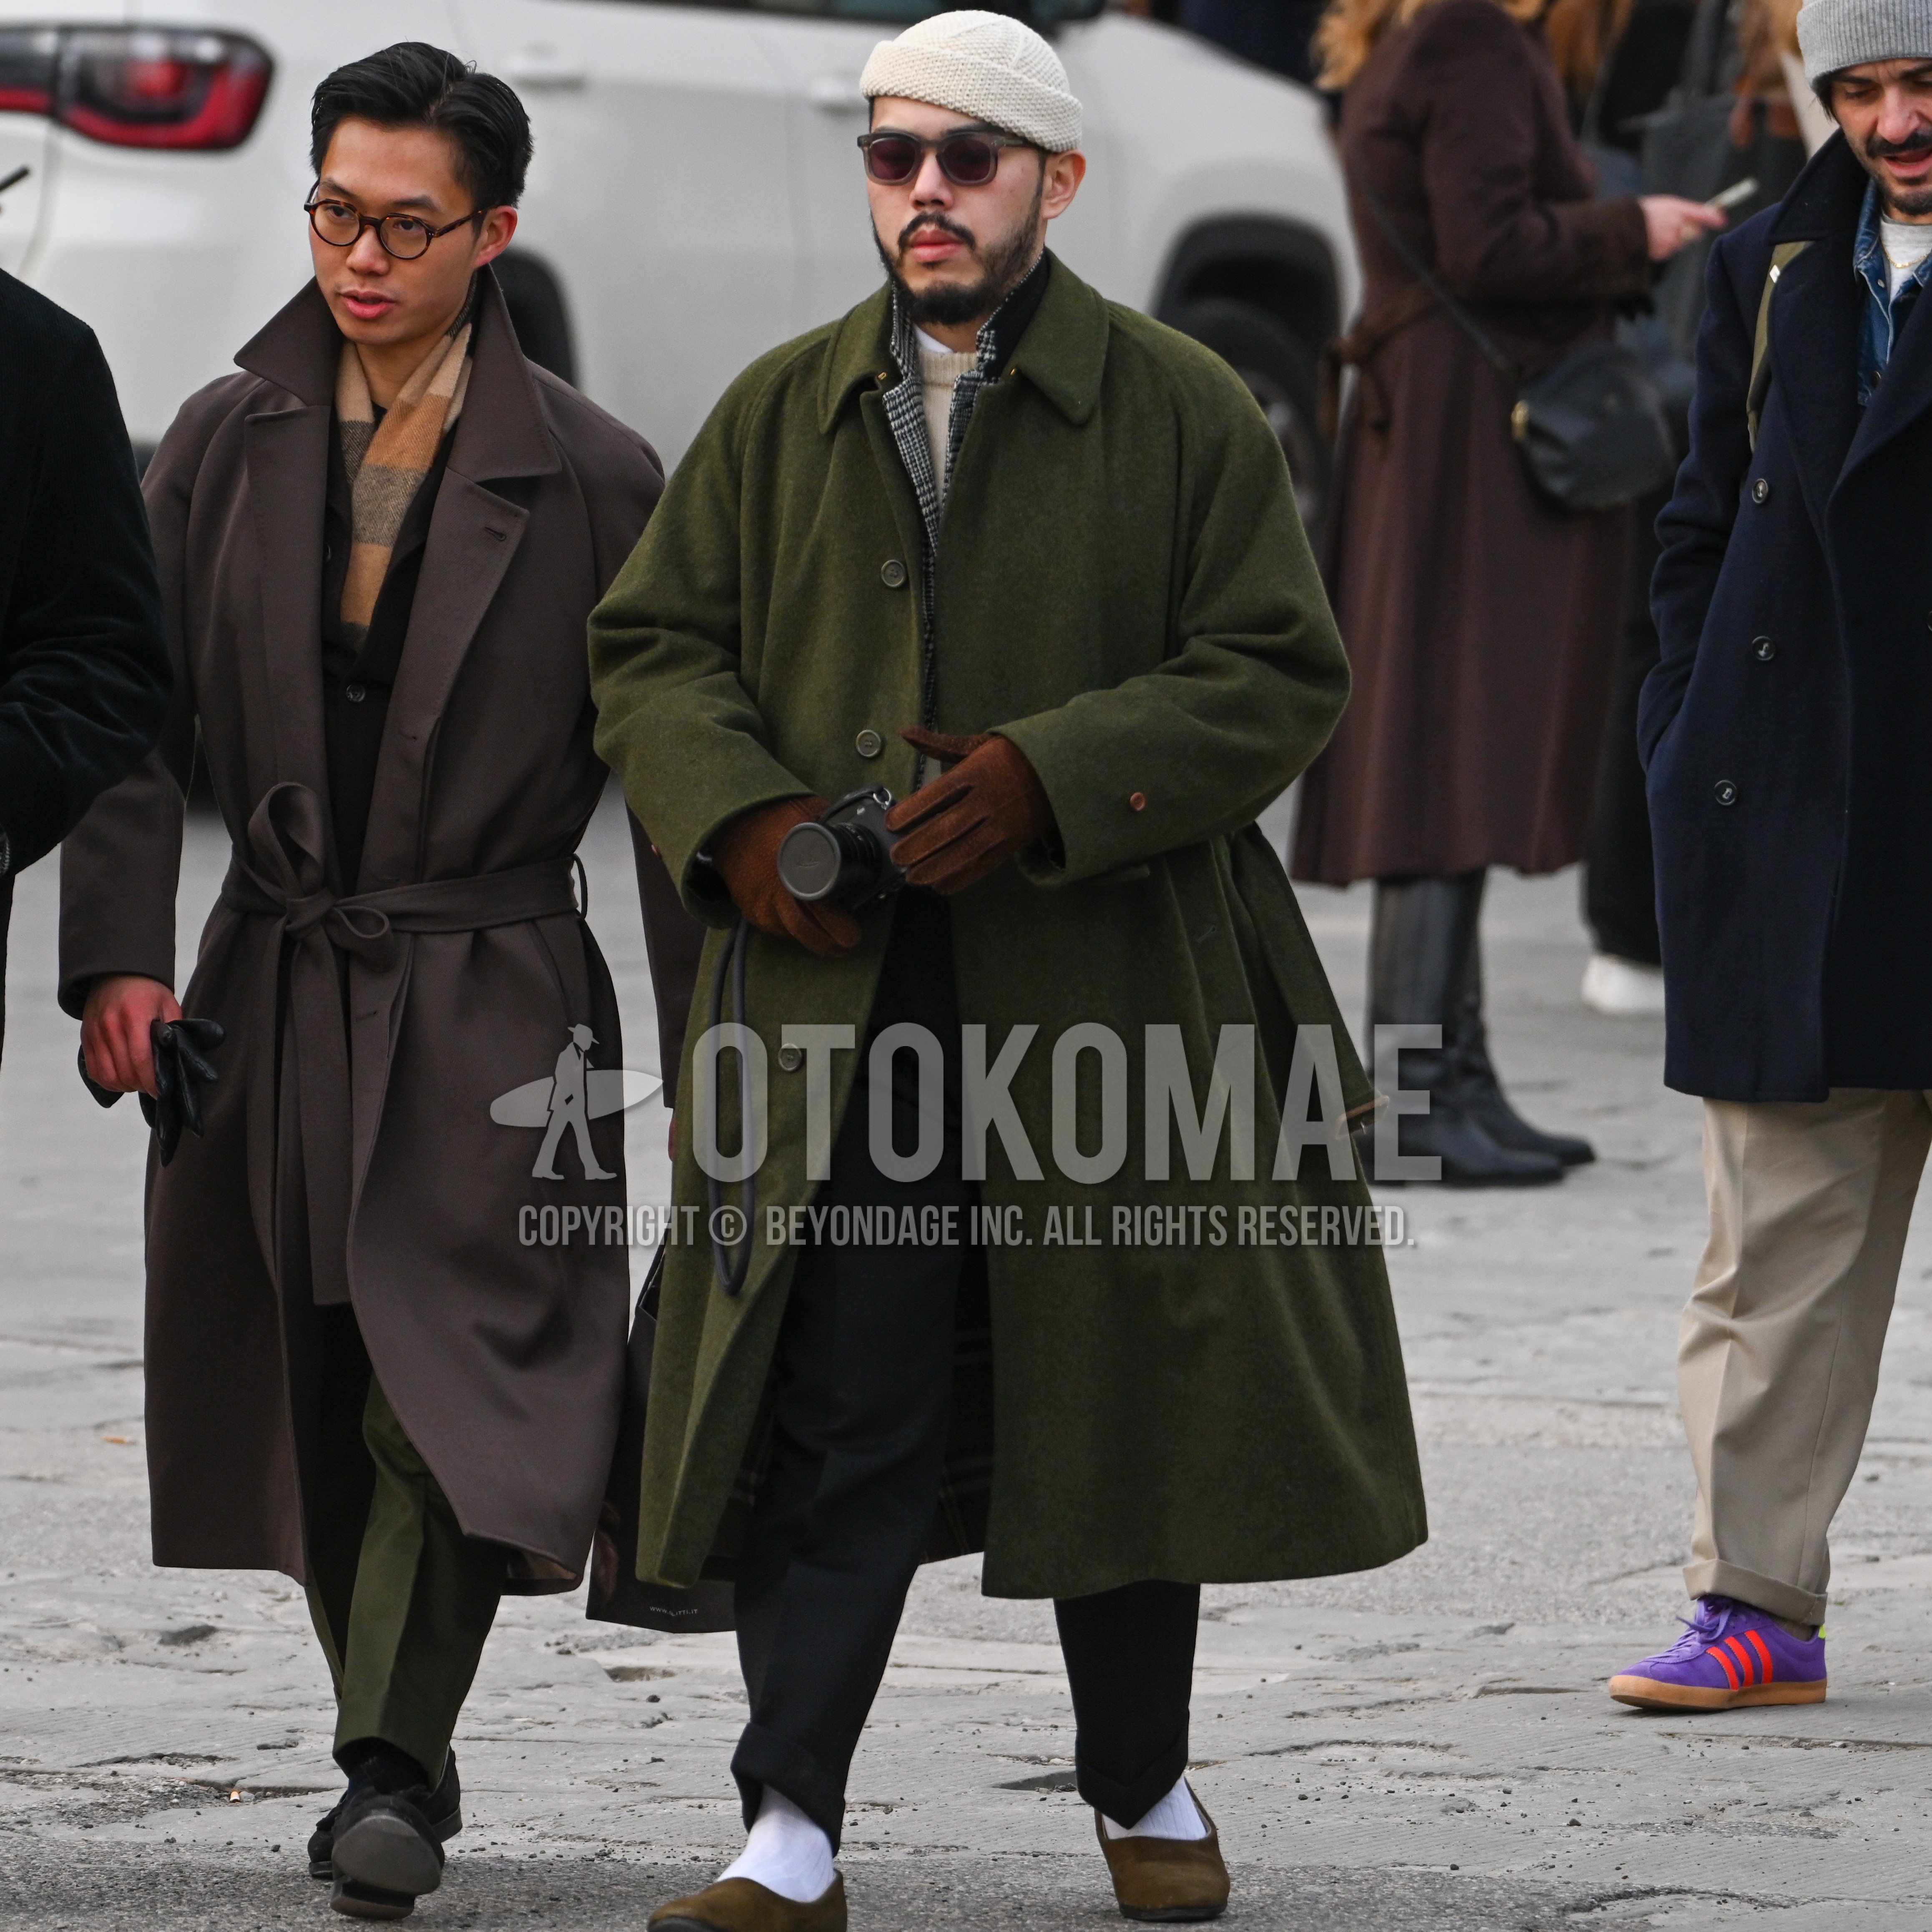 Men's autumn winter outfit with white plain knit cap, dark gray plain sunglasses, olive green plain stenkarrer coat, gray check tailored jacket, white plain shirt, beige plain sweater, black plain slacks, white plain socks, brown suede shoes leather shoes.